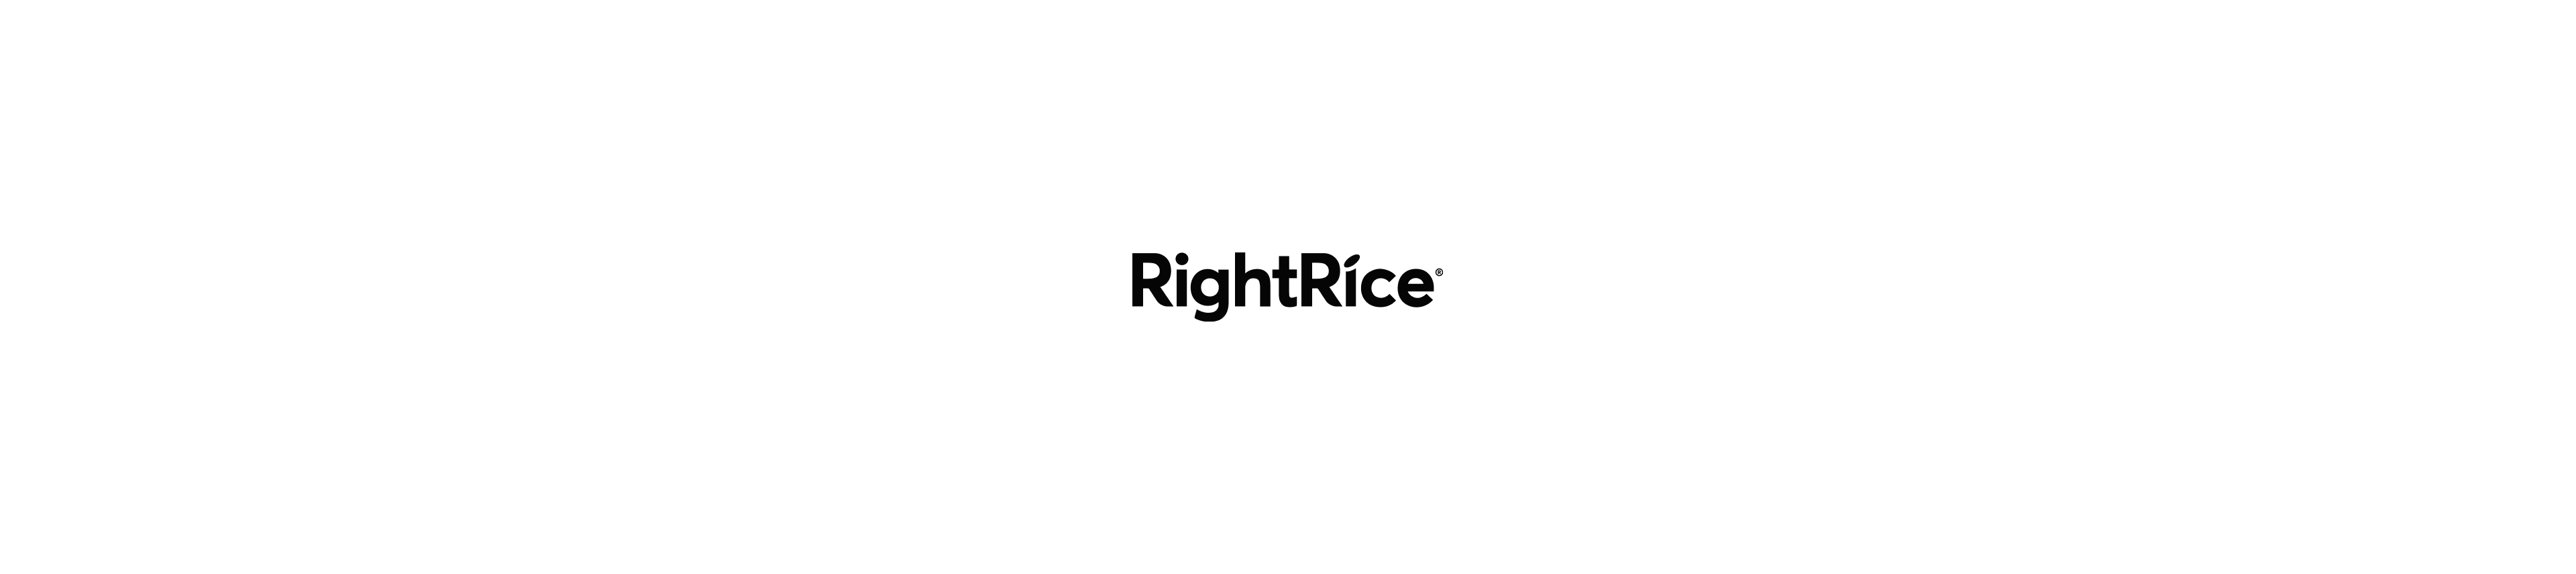 rightrice